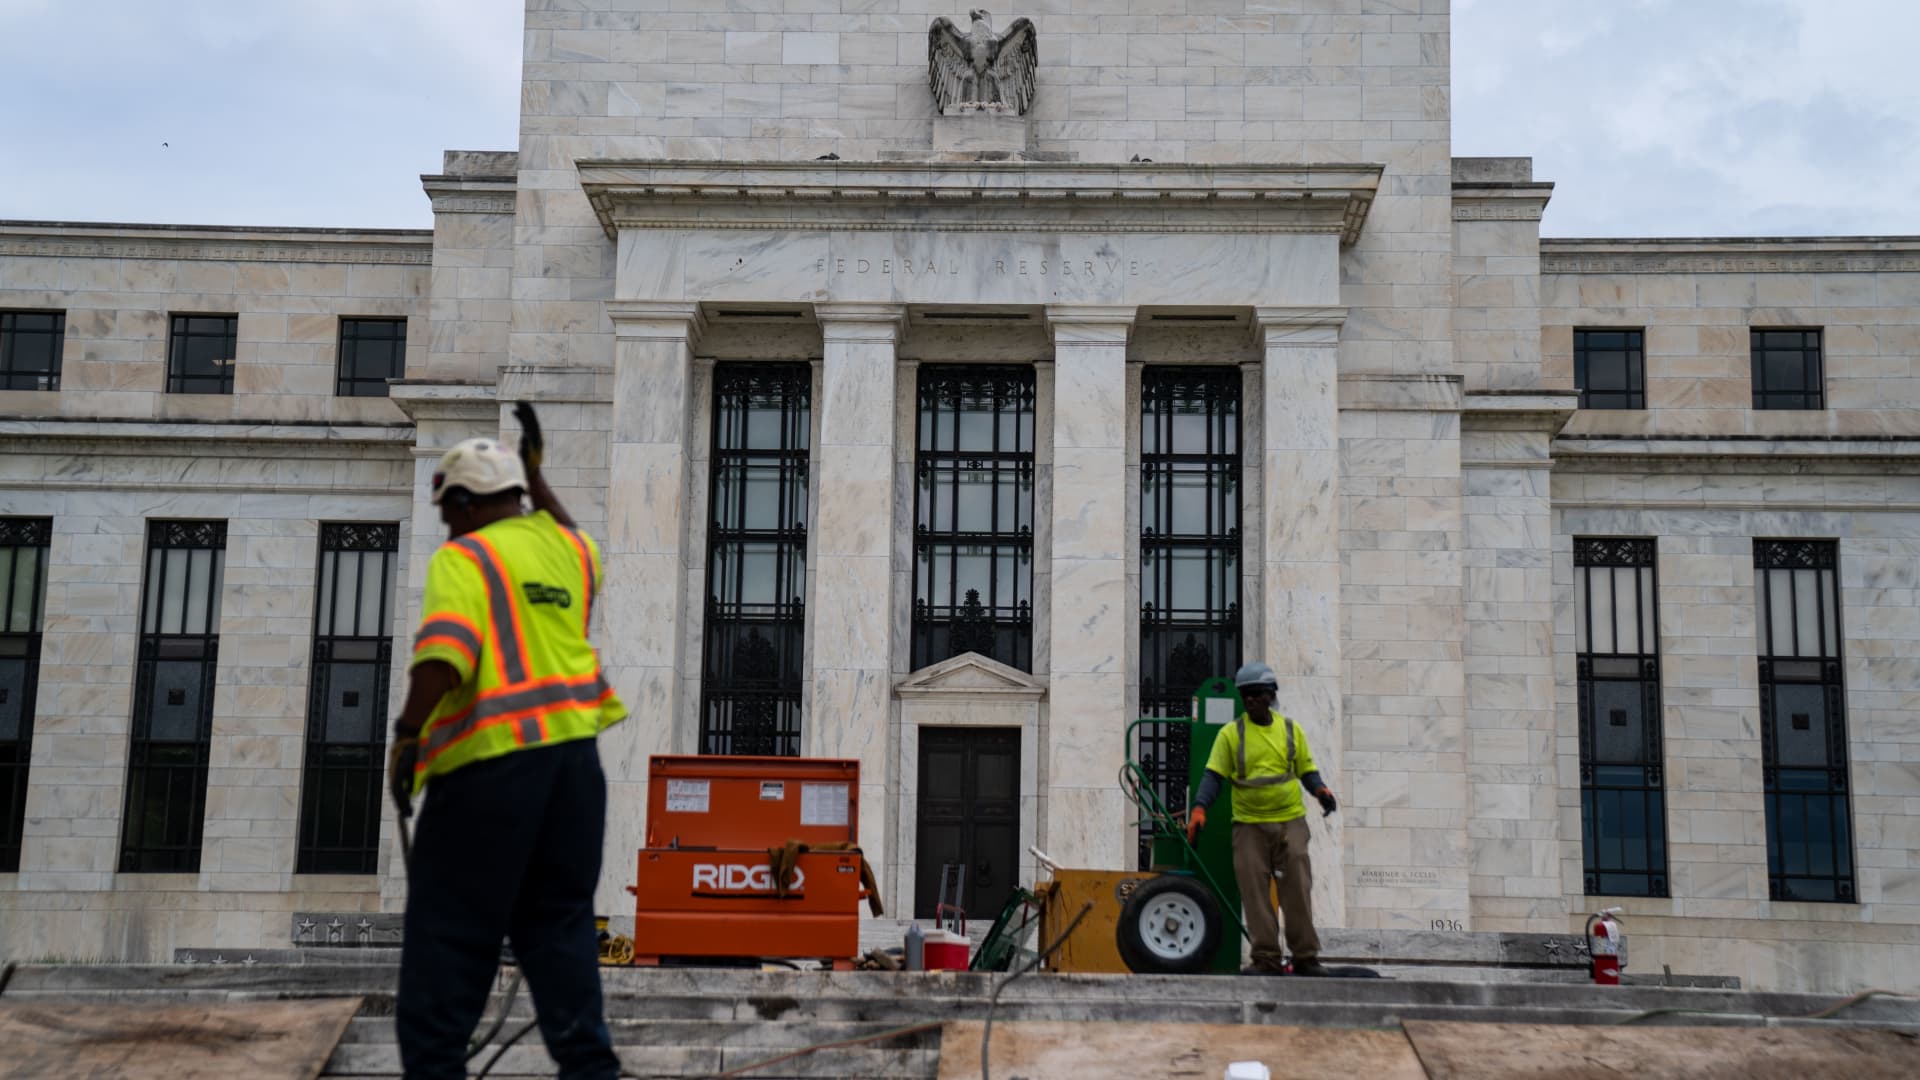 Construction workers outside the Marriner S. Eccles Federal Reserve Building, photographed on Wednesday, July 27, 2022 in Washington, DC.